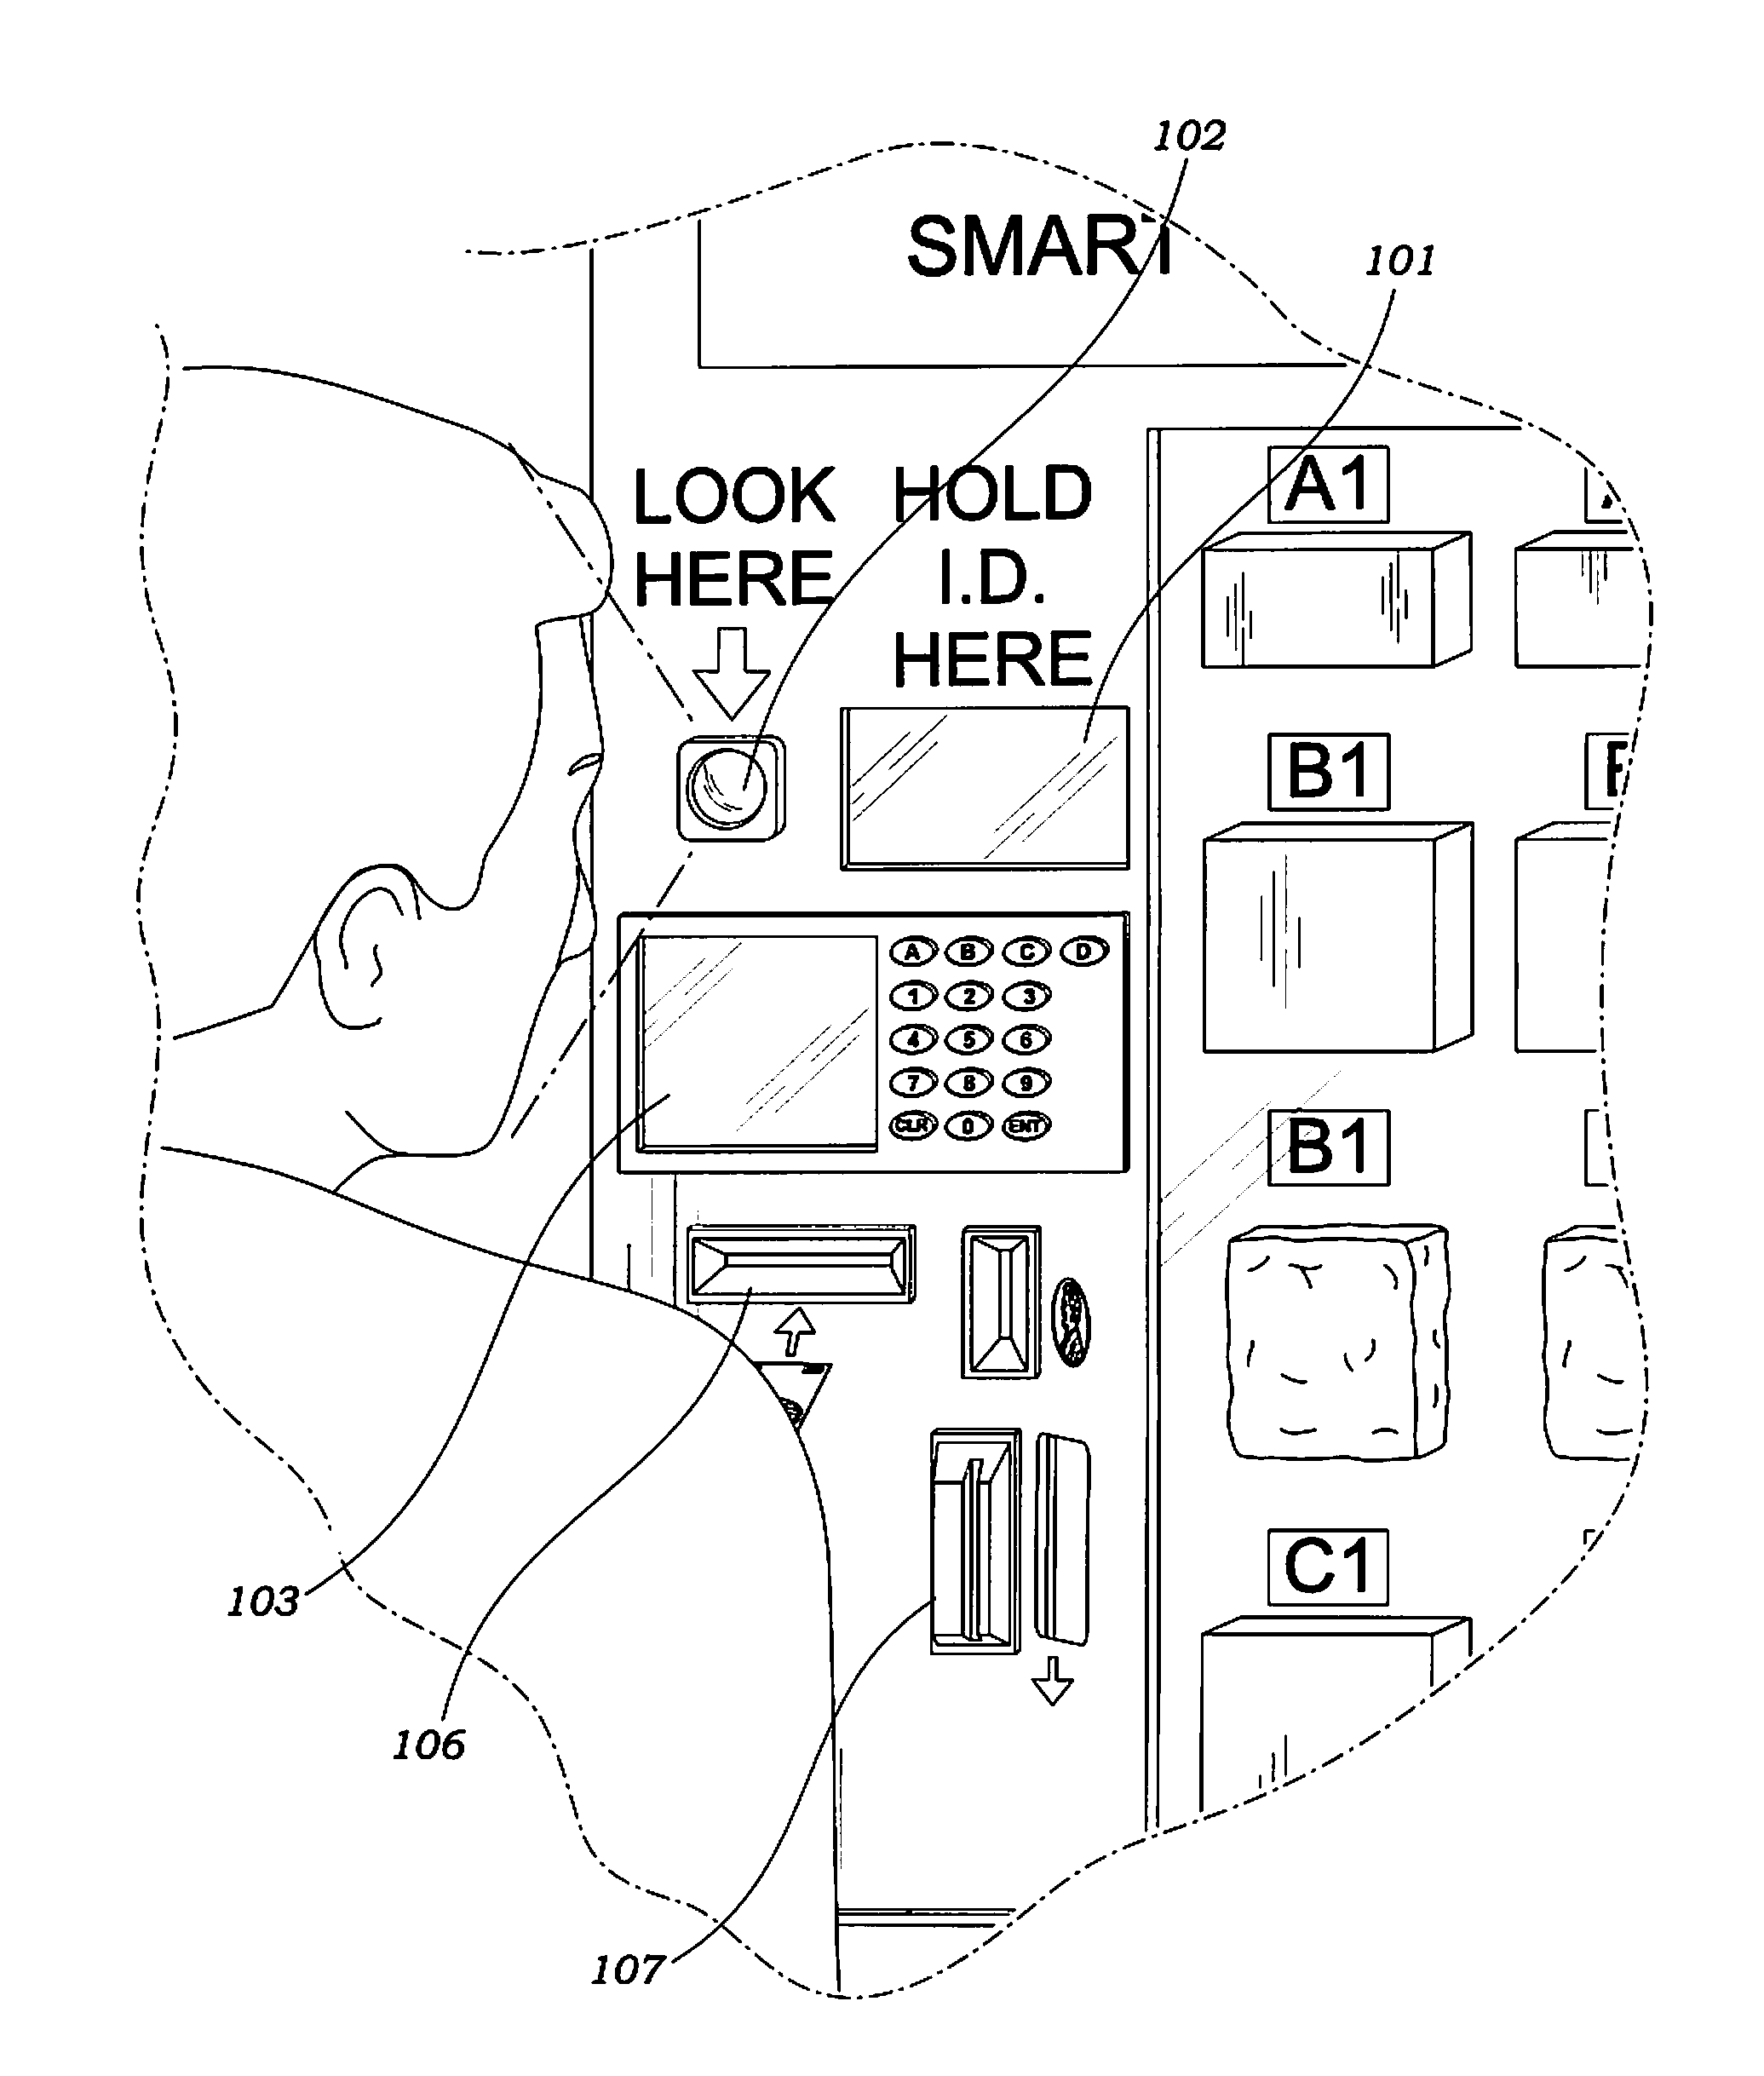 Smart vending apparatus with automated regulatory compliance verification and method of use